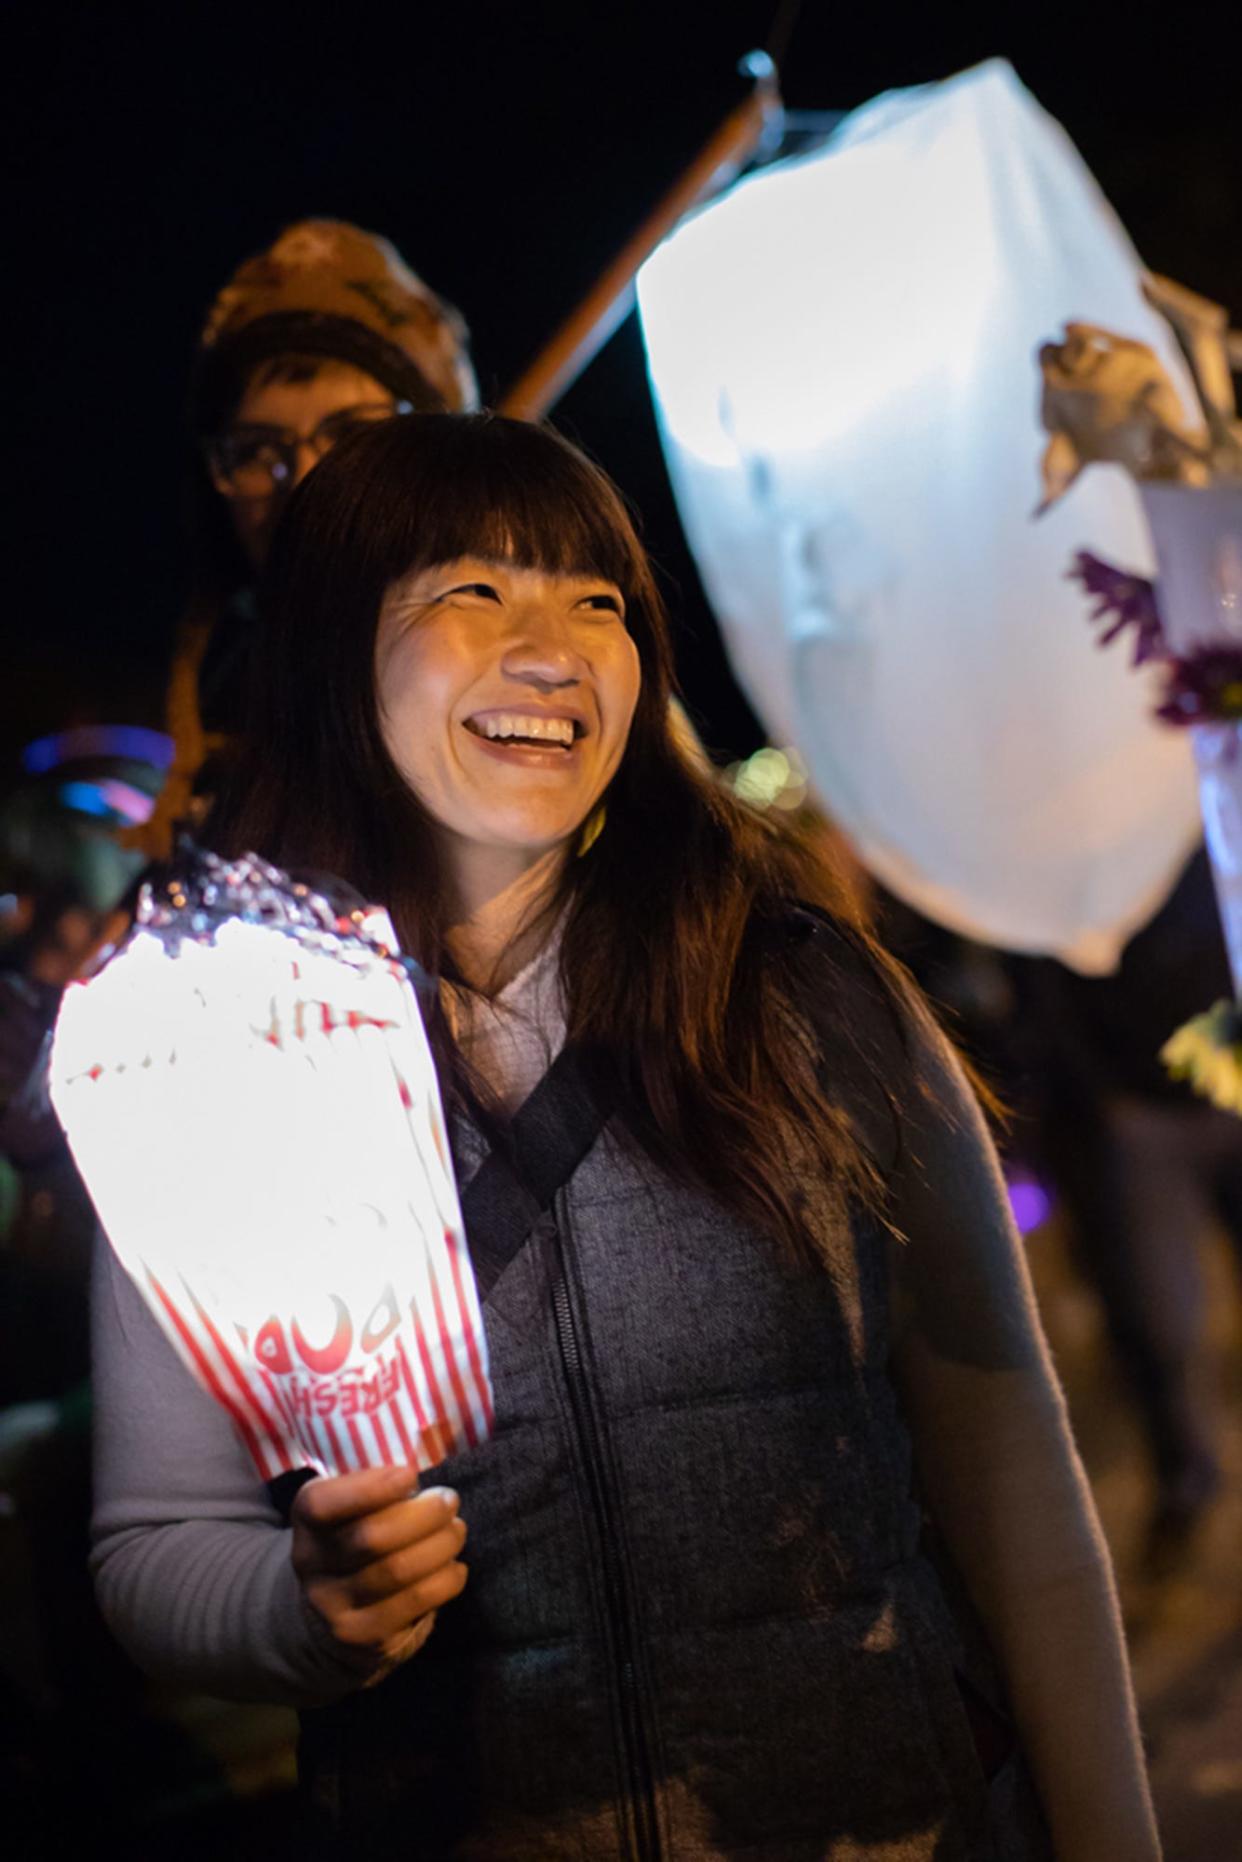 This photo was taken at a lantern parade that the Lyndon House Art Center hosted in October of 2019. The 2023 Flight of the Fireflies Lantern Parade will take place at Dudley Park on Apr. 1.